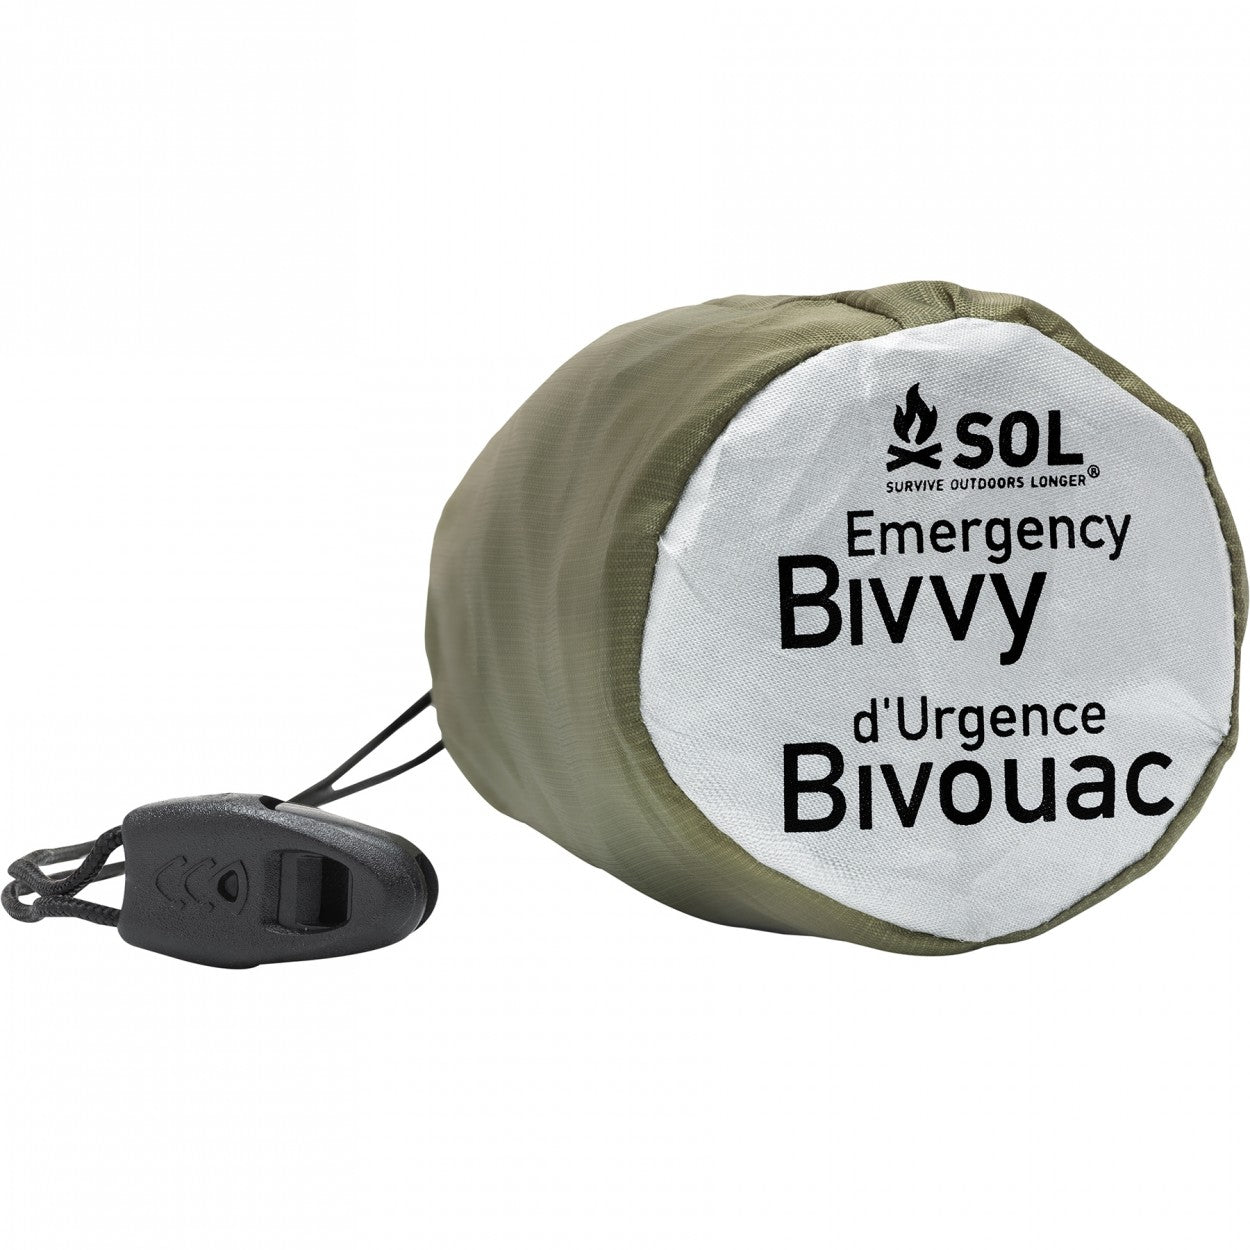 Emergency Bivvy with Rescue Whistle by Survive Outdoors Longer (SOL)